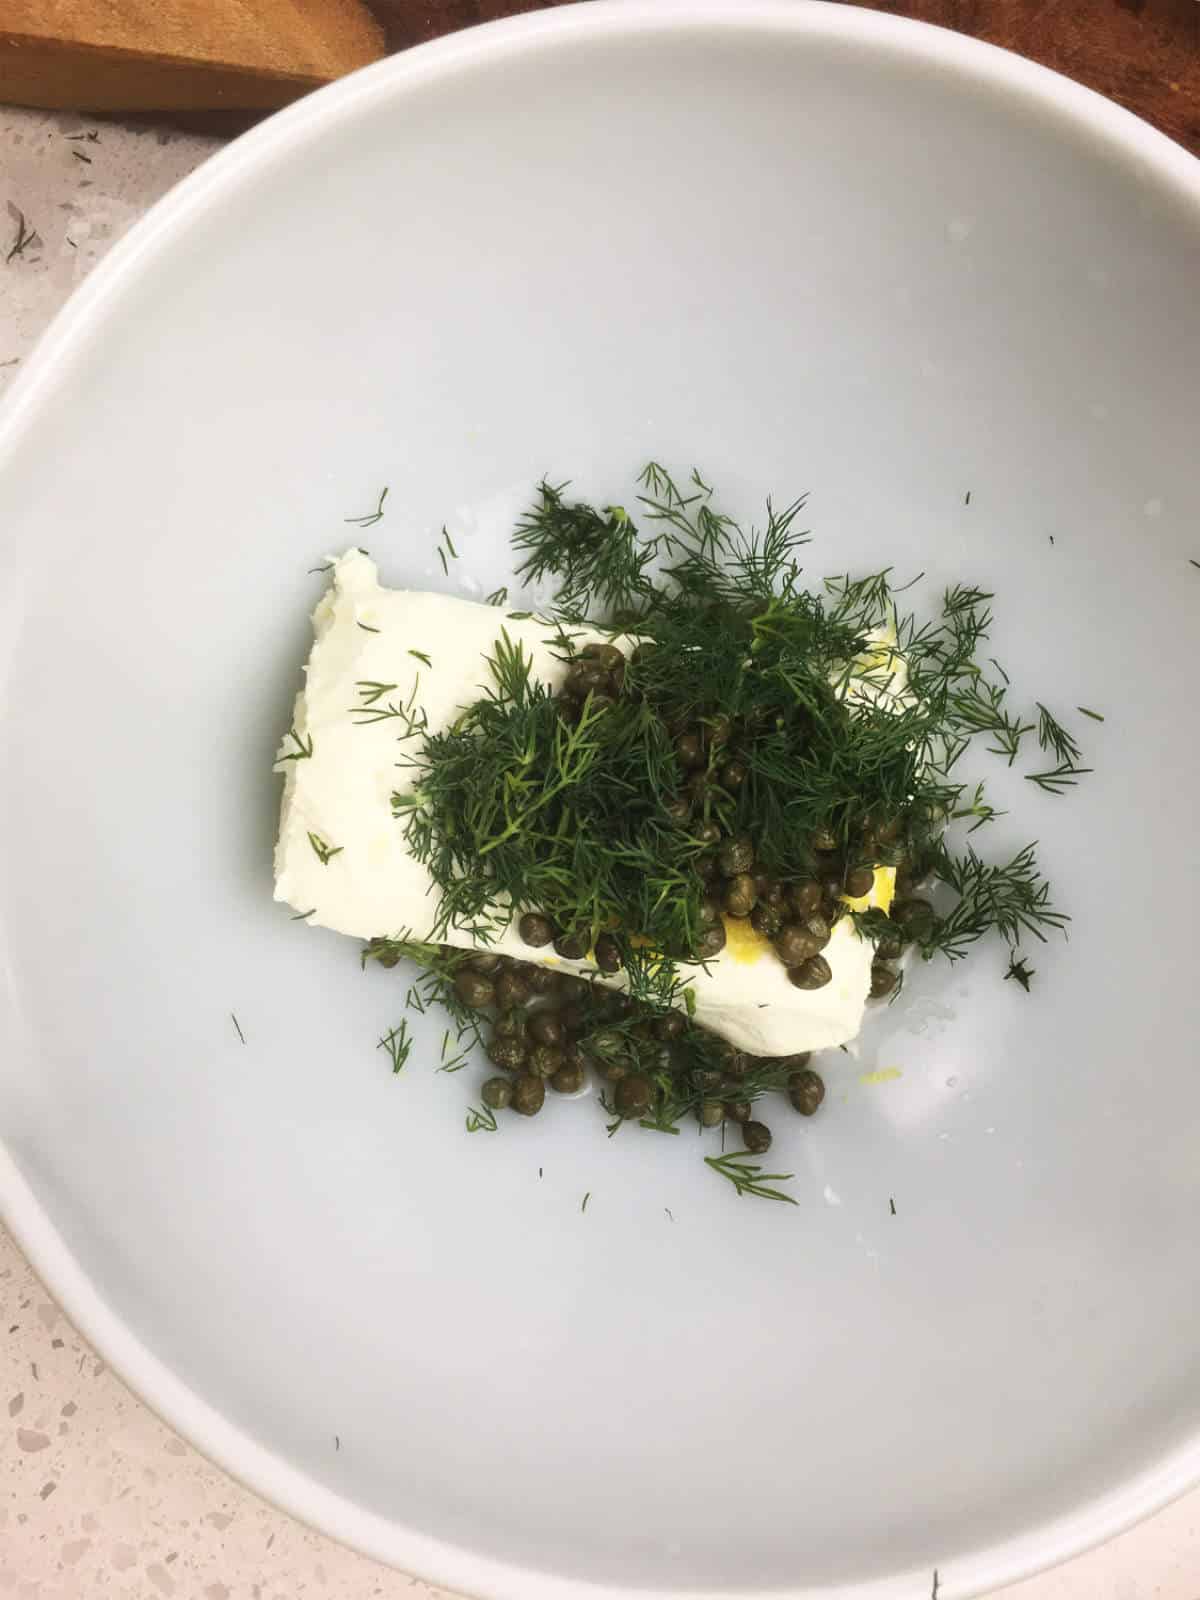 dill weed and cream cheese, and capers in a bowl.